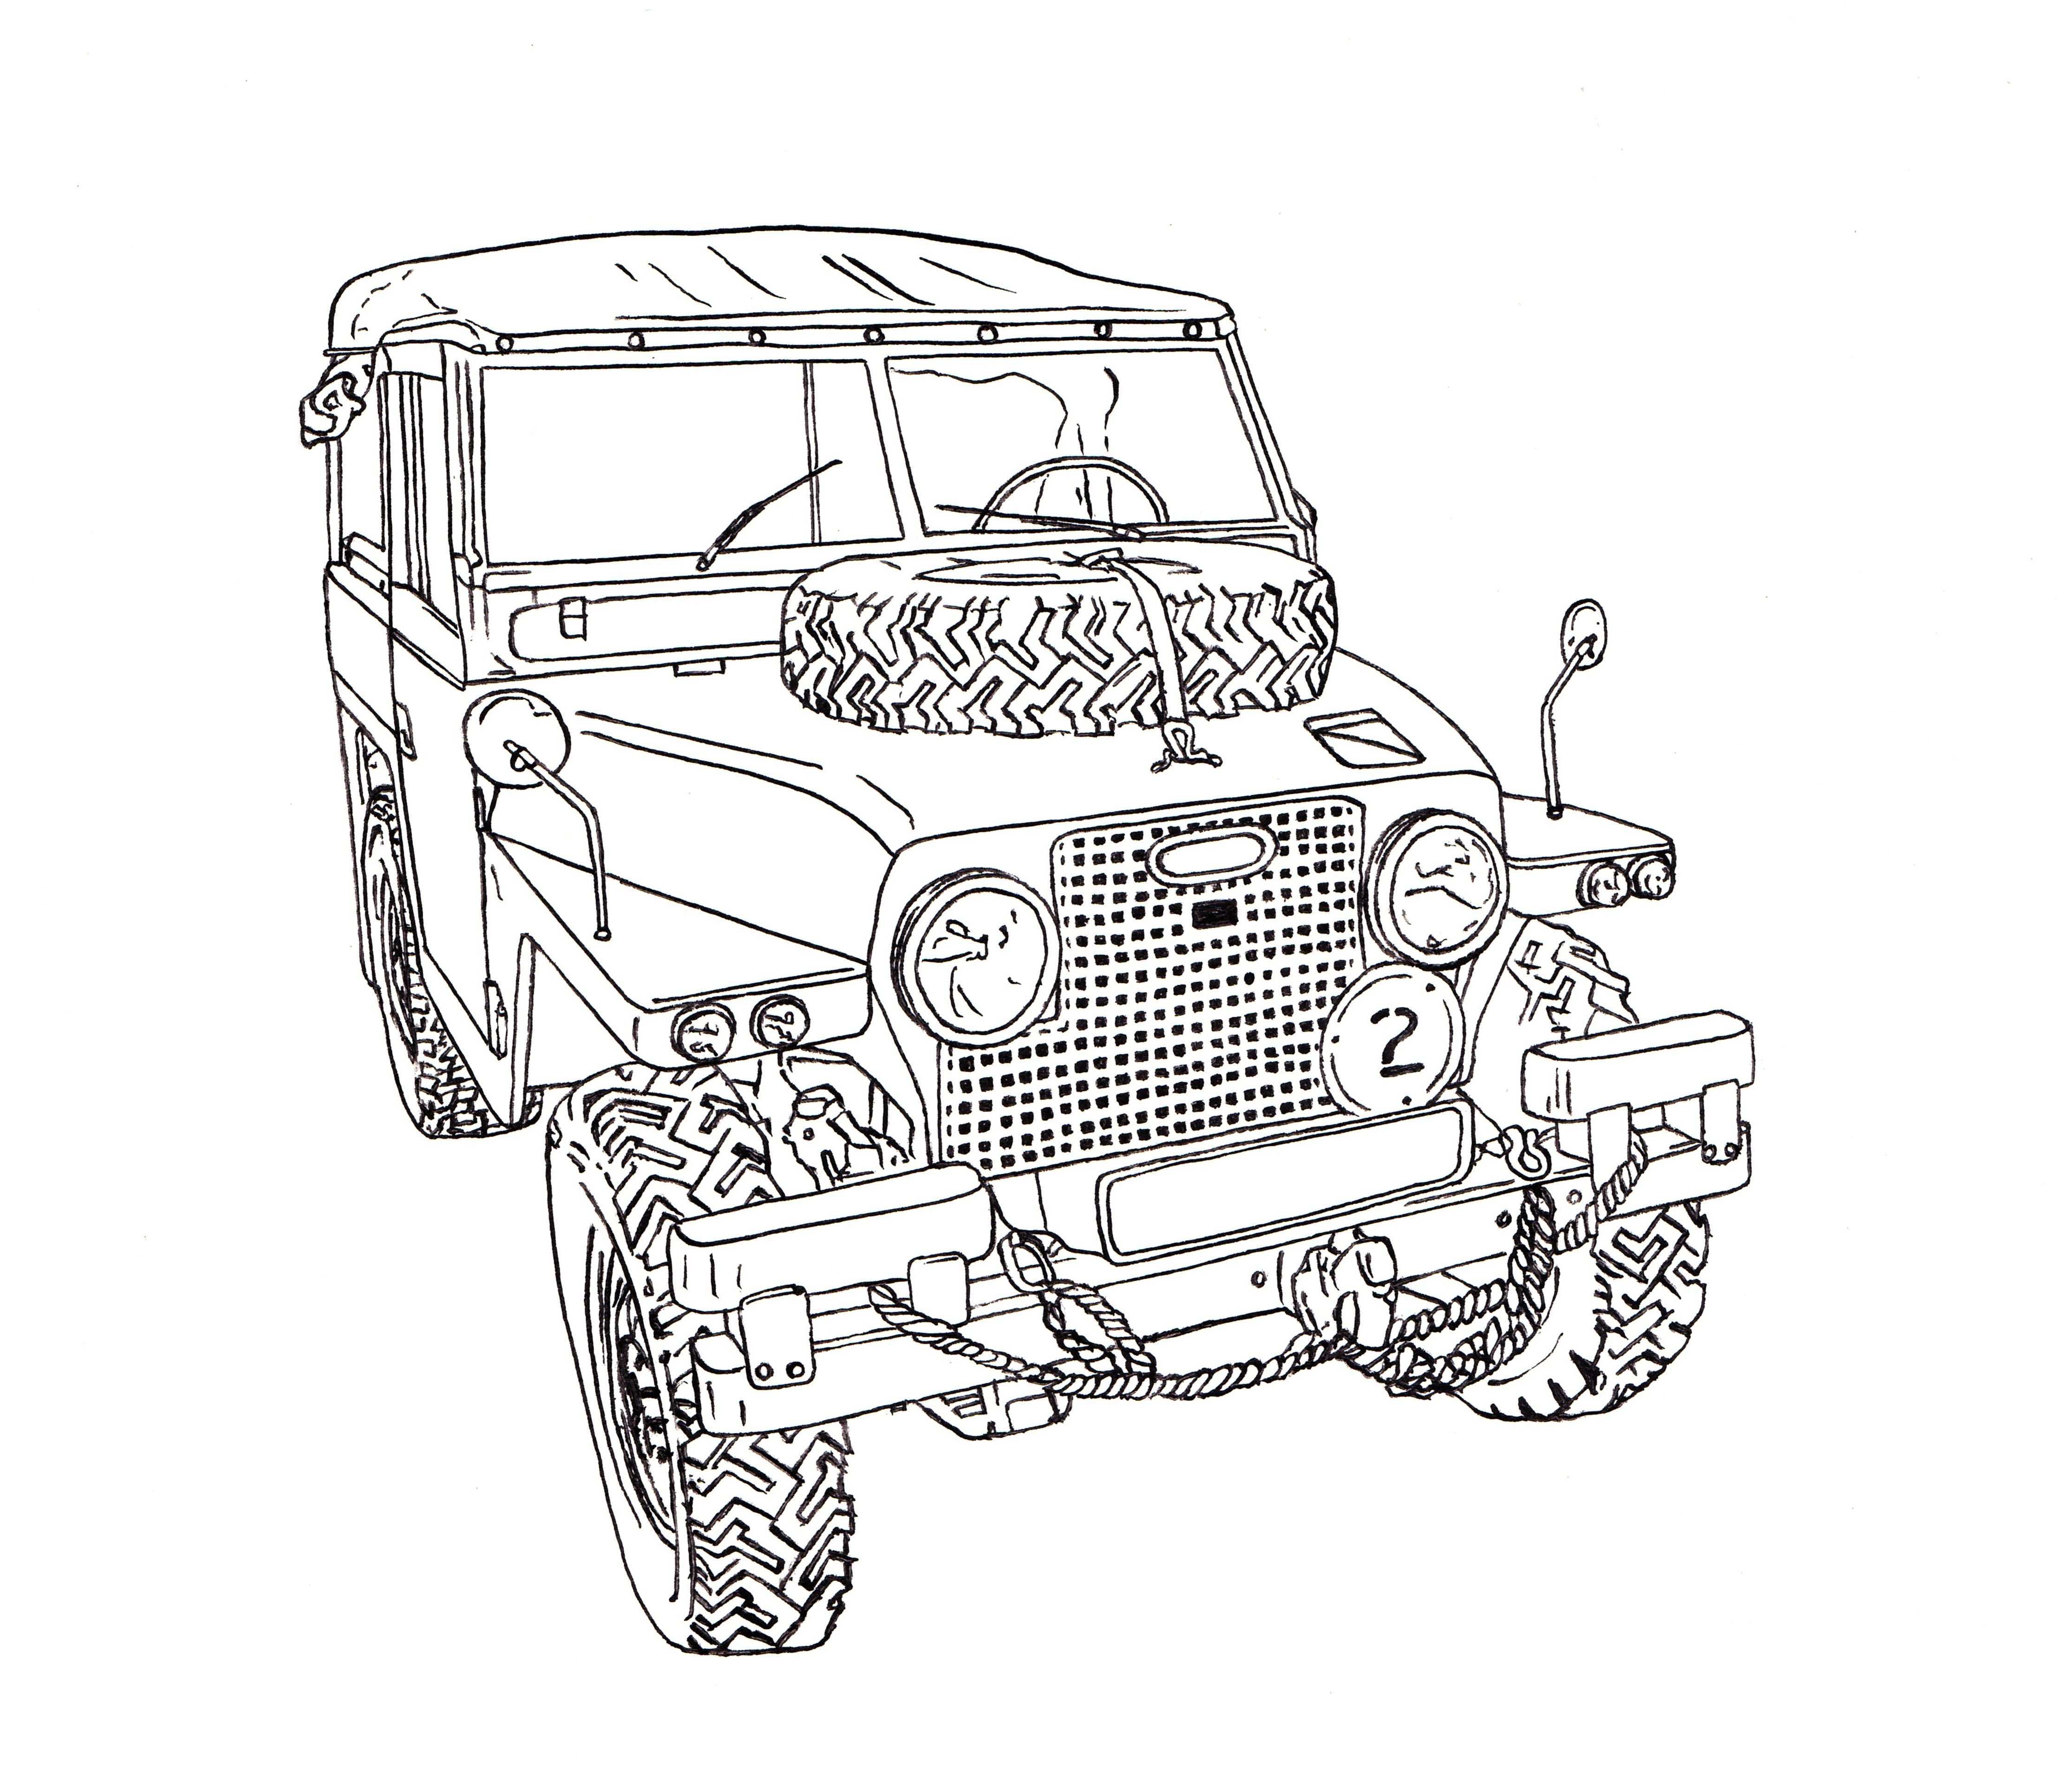 Land Rover Half Ton Lightweight Ink Drawing Land Rover Rover Ranger Retro Cars